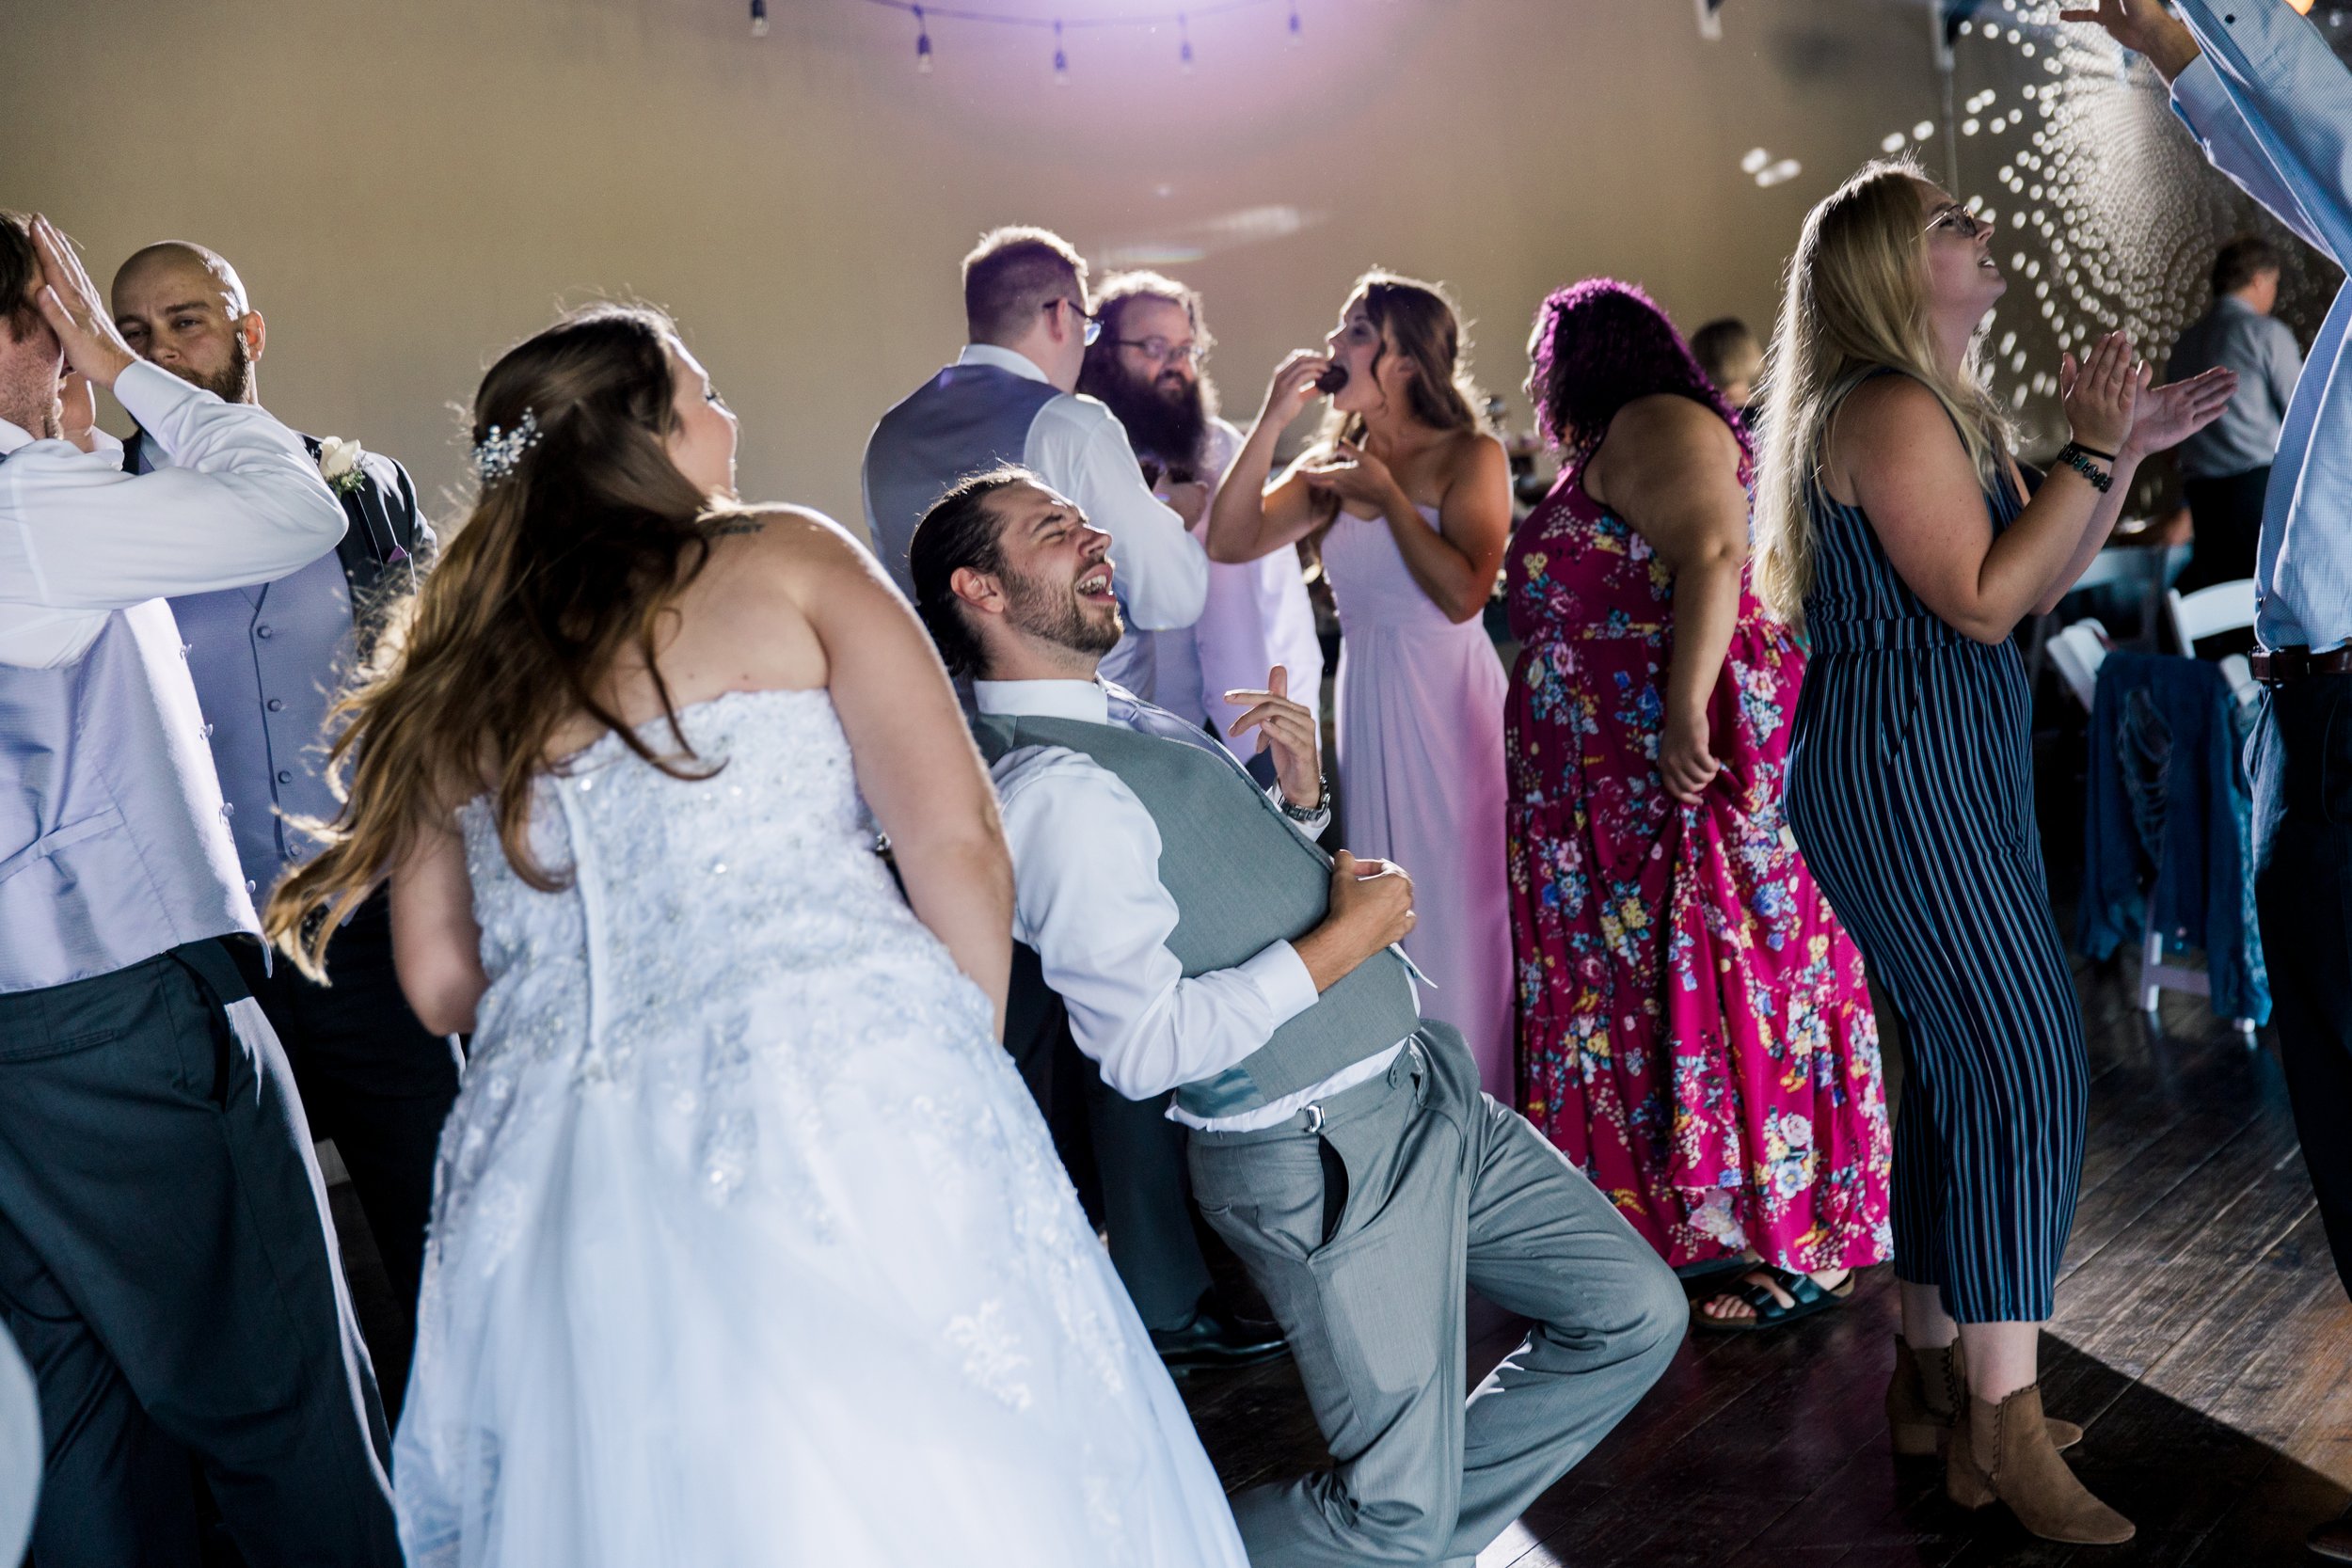  The dancefloor at a wedding reception. A person in the center of the frame plays air guitar. 